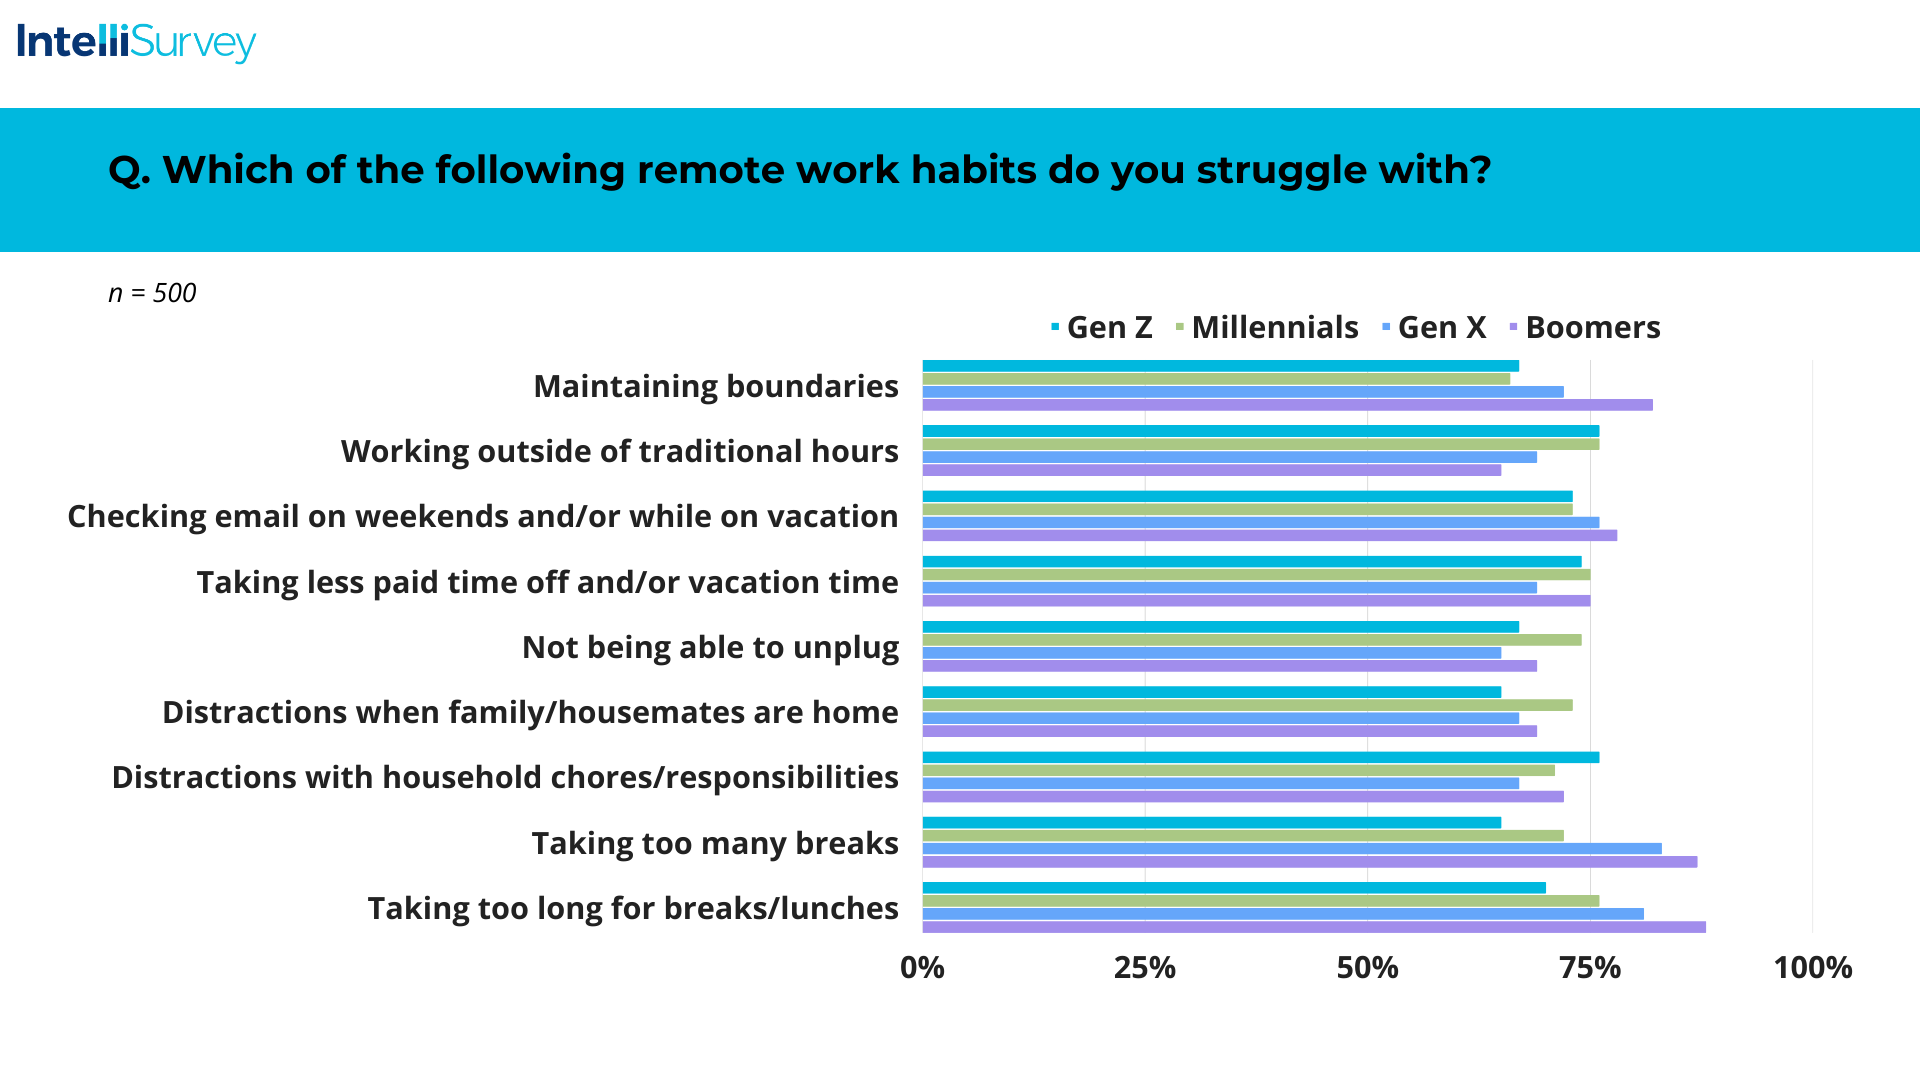 Chart of remote work habits different generations struggle with